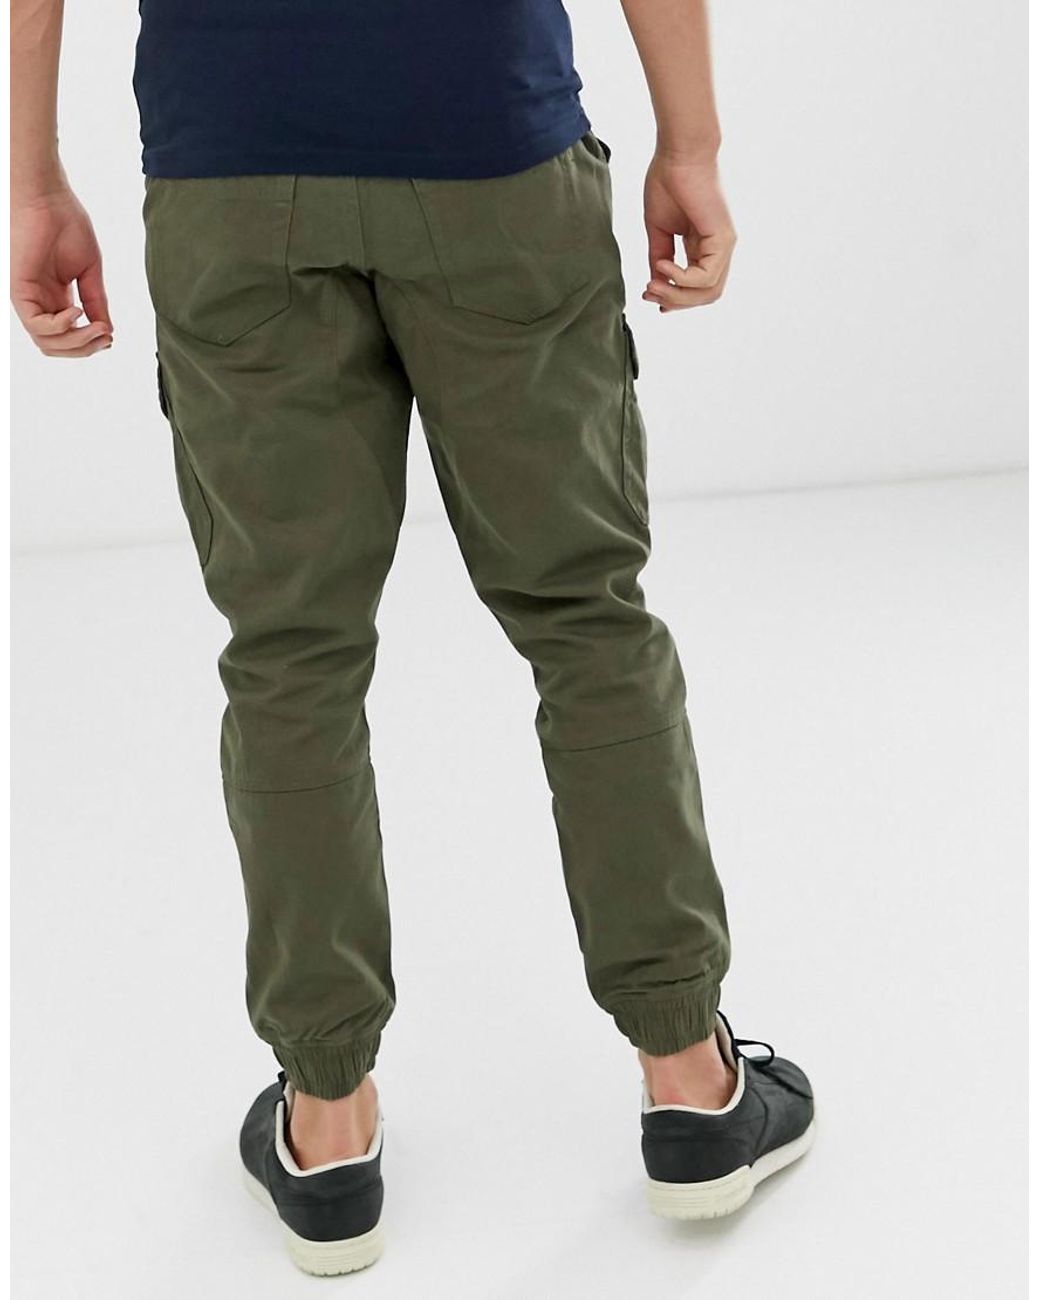 Another Influence Plus cuffed cargo pants in black